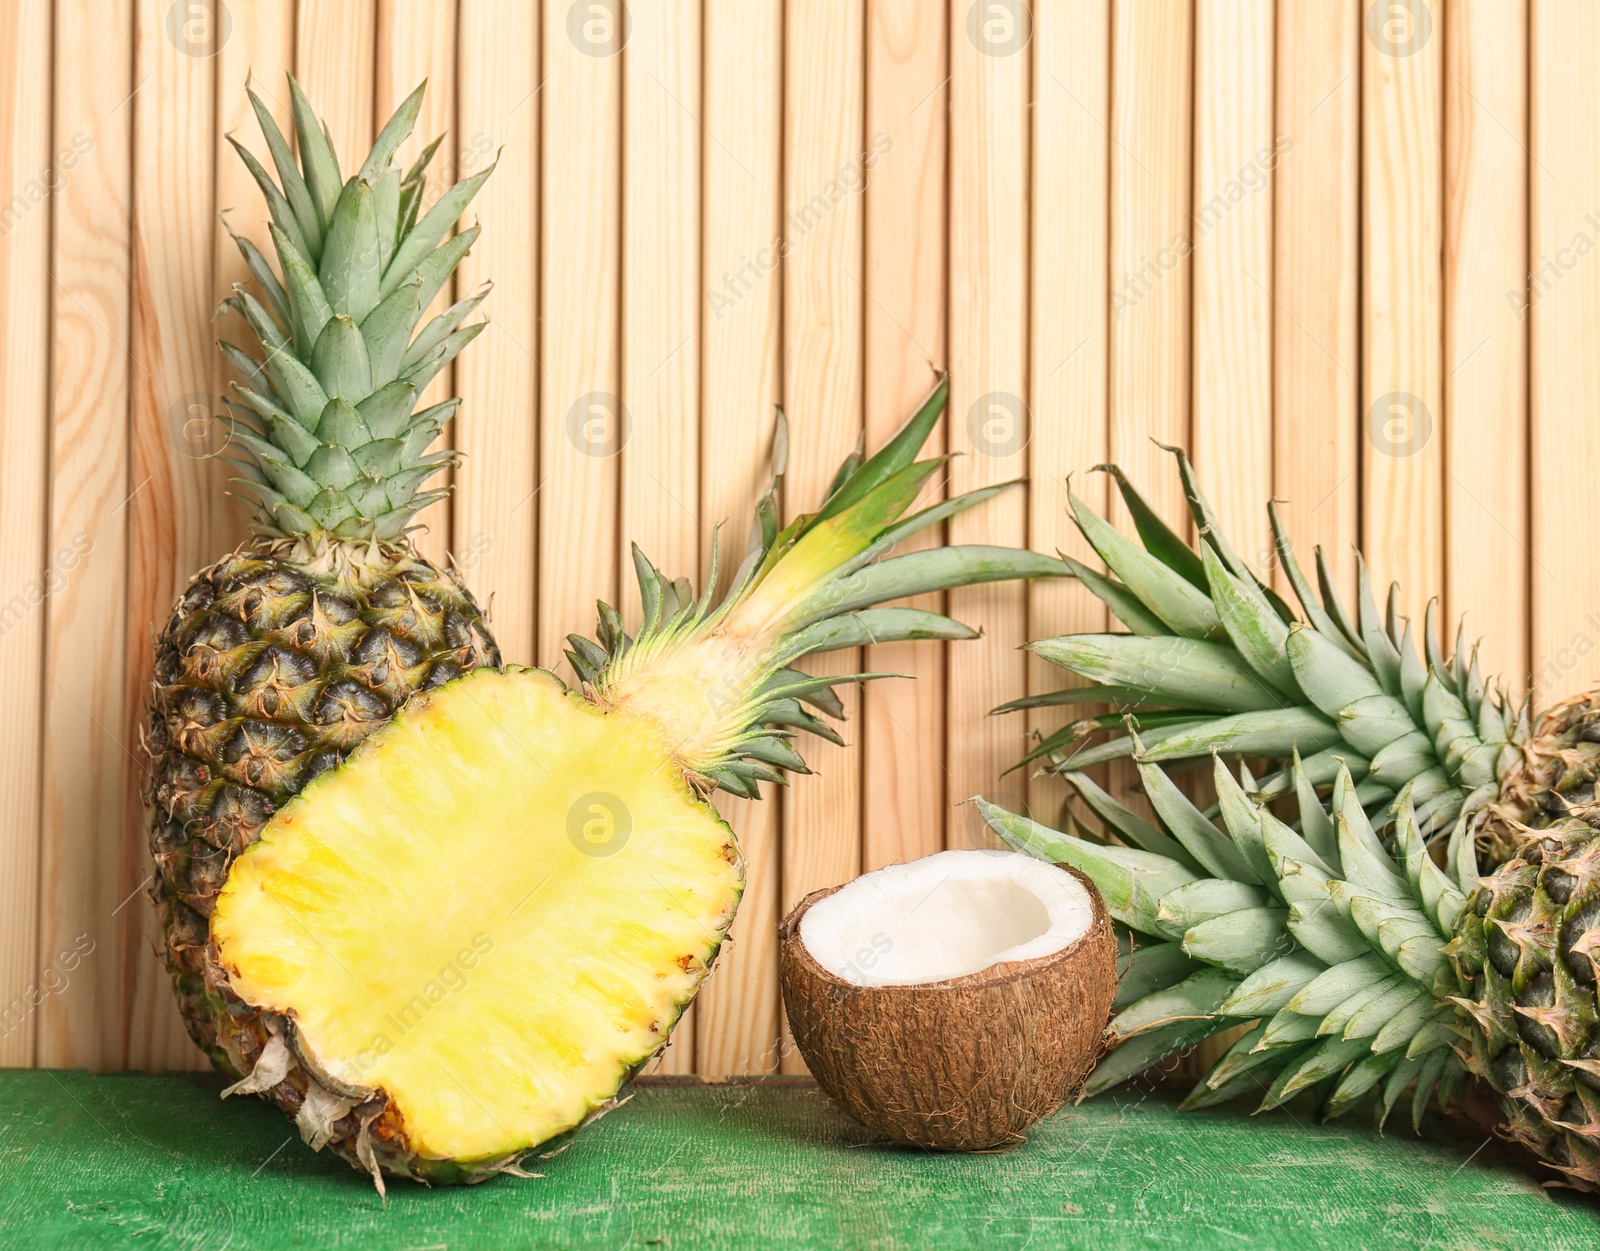 Photo of Fresh pineapples and coconut on table against wooden wall